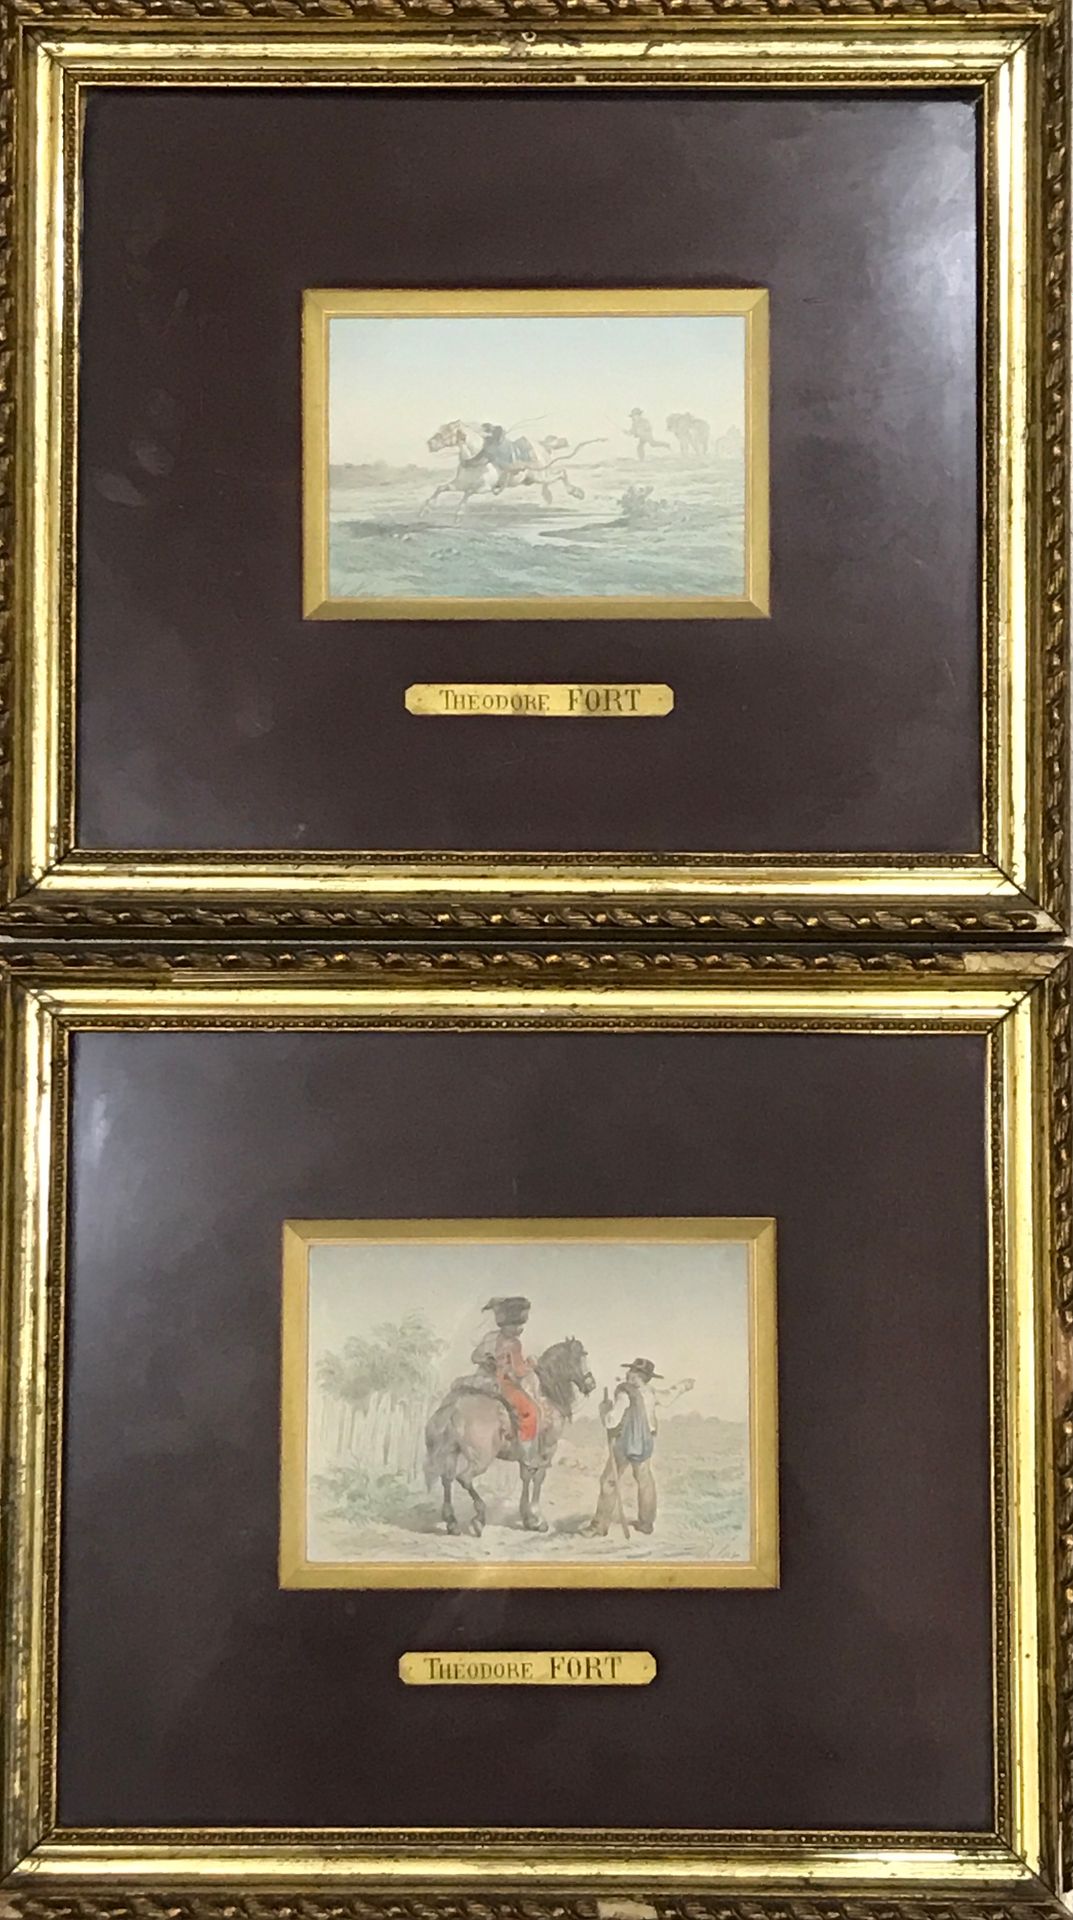 Null Theodore FORT 1810-1896

Pair of gouache watercolors.

"The steed" and "the&hellip;